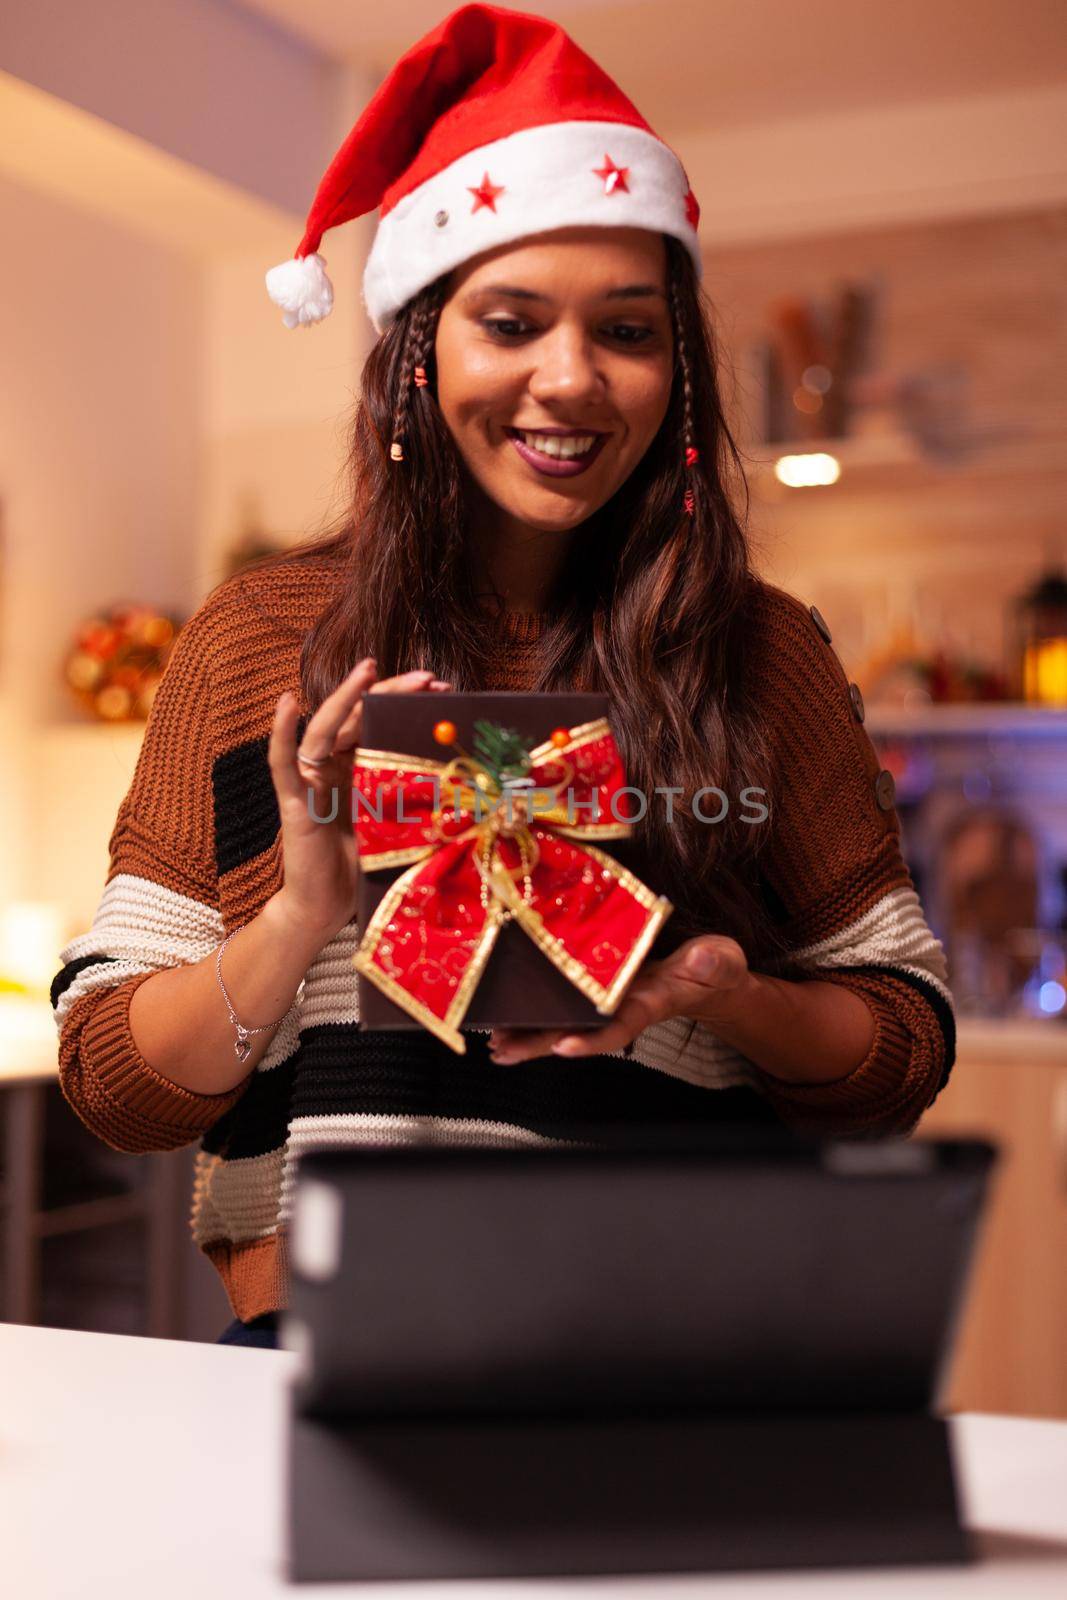 Young woman wearing santa hat using video call technology on tablet at home with ornaments, decorations and tree in kitchen. Caucasian person showing gift with ribbon for christmas party